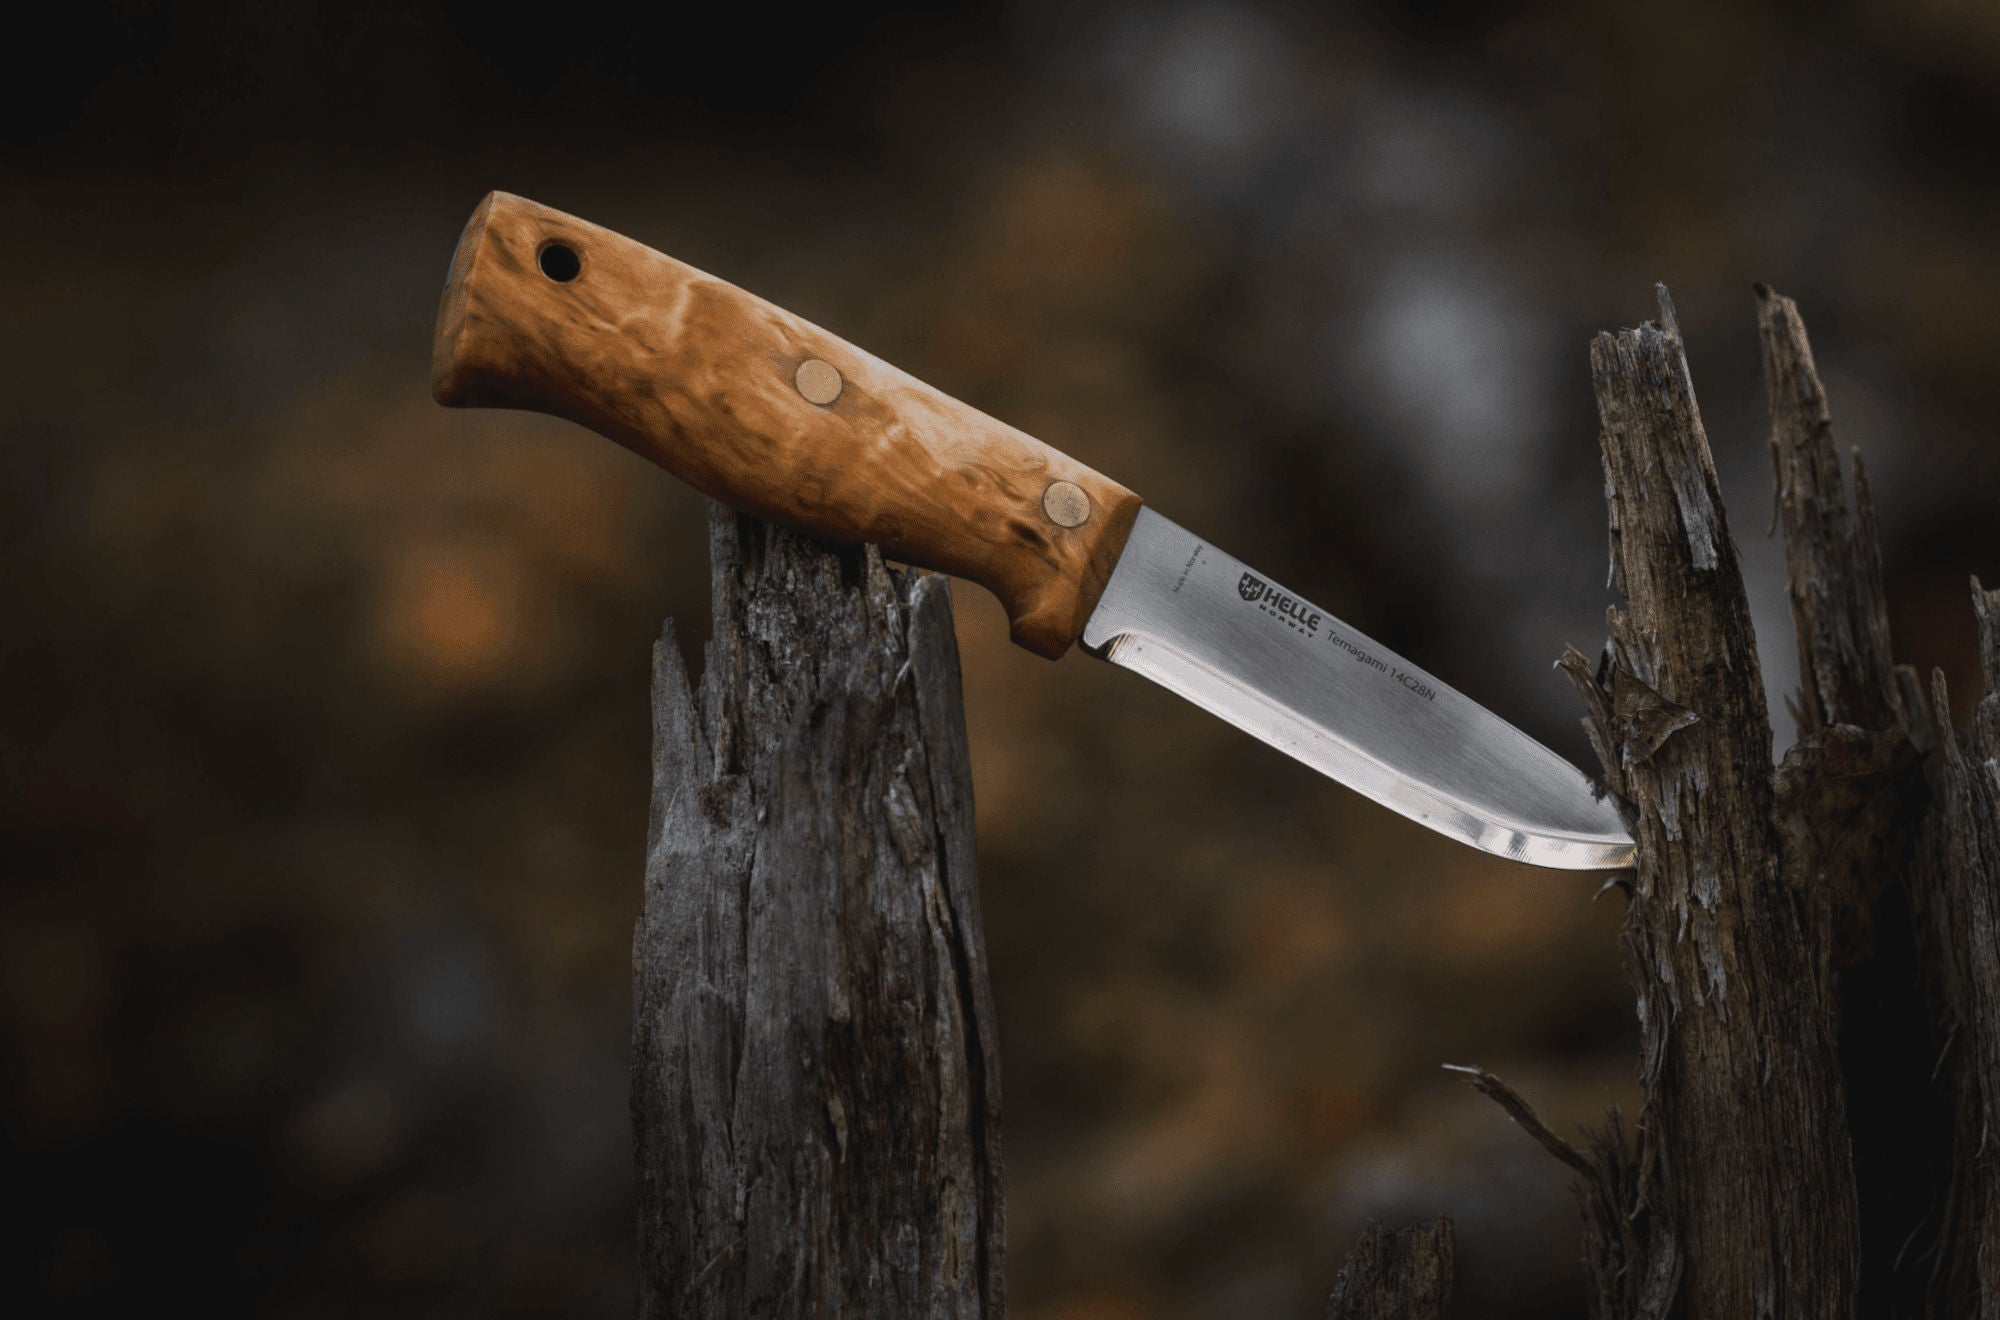 Temagami 14C28N - 10 year collaboration limited edition – Helle Knives